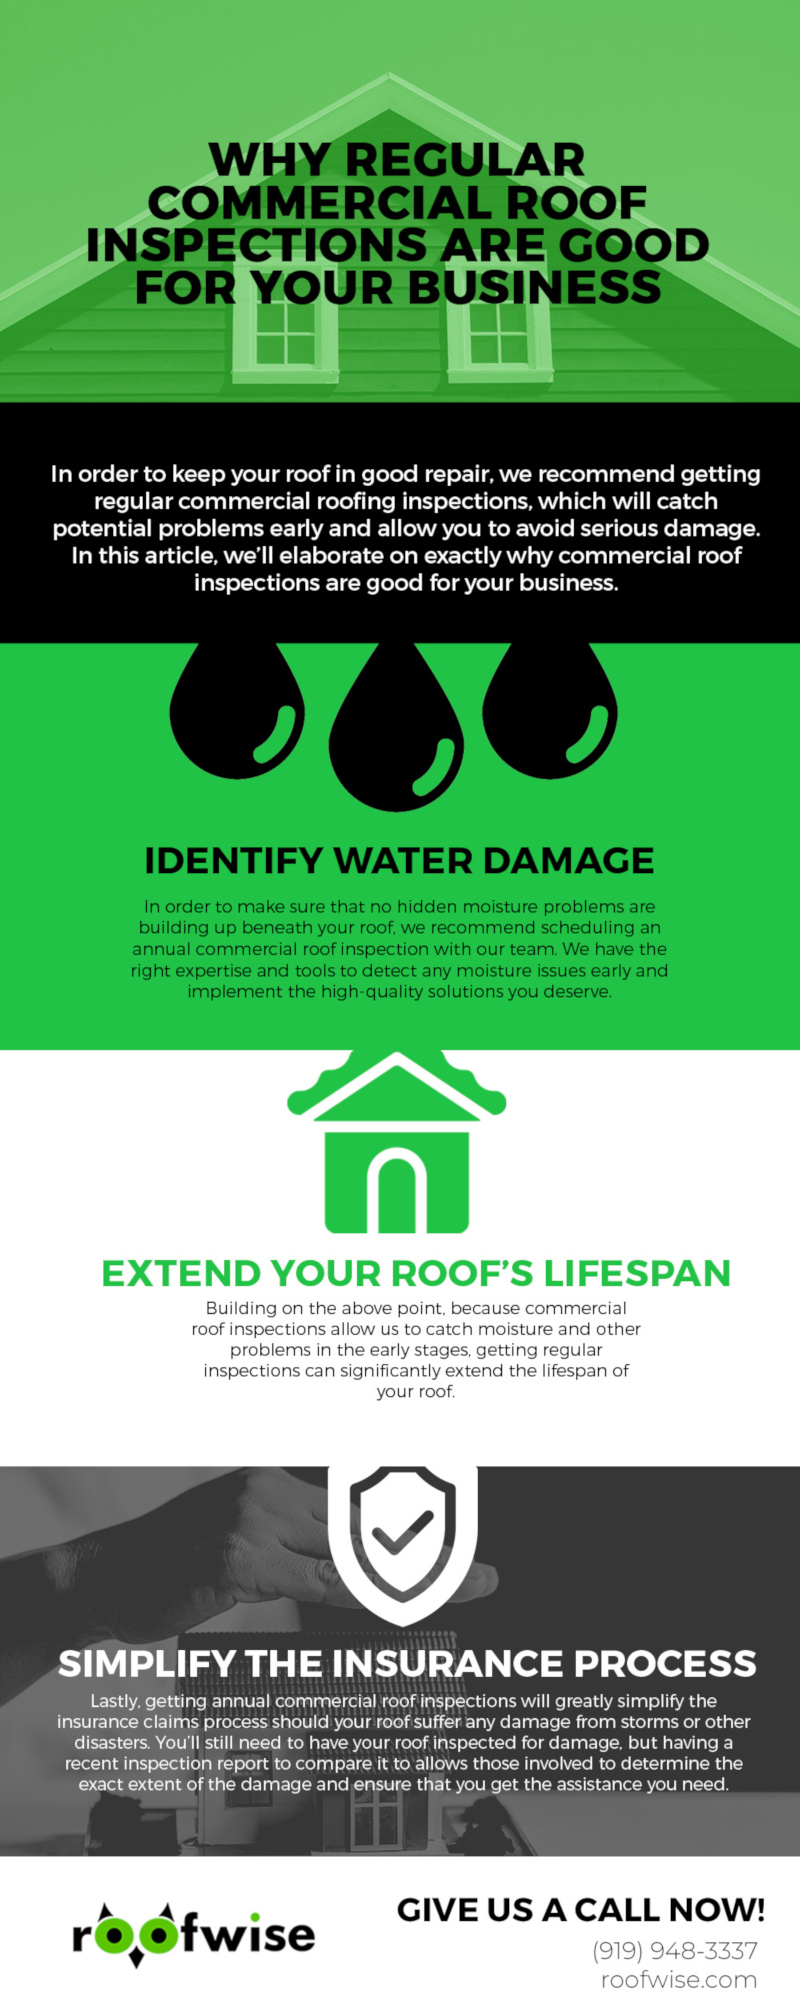 Why Regular Commercial Roof Inspections are Good for Your Business [infographic]